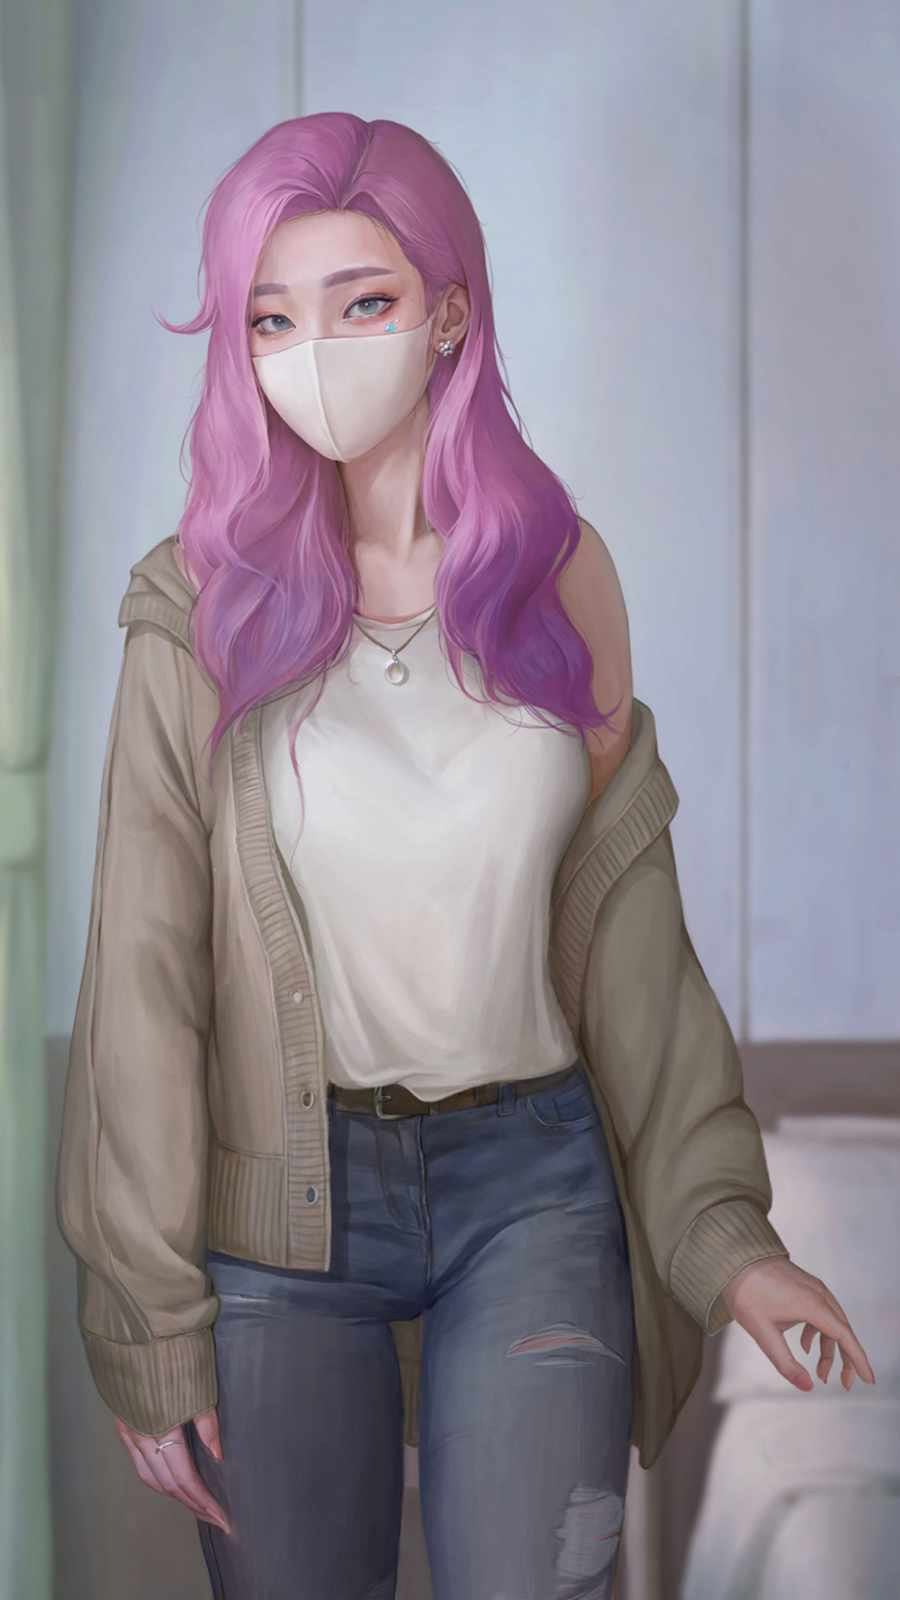 Pink Hair Anime Girl IPhone Wallpaper  IPhone Wallpapers